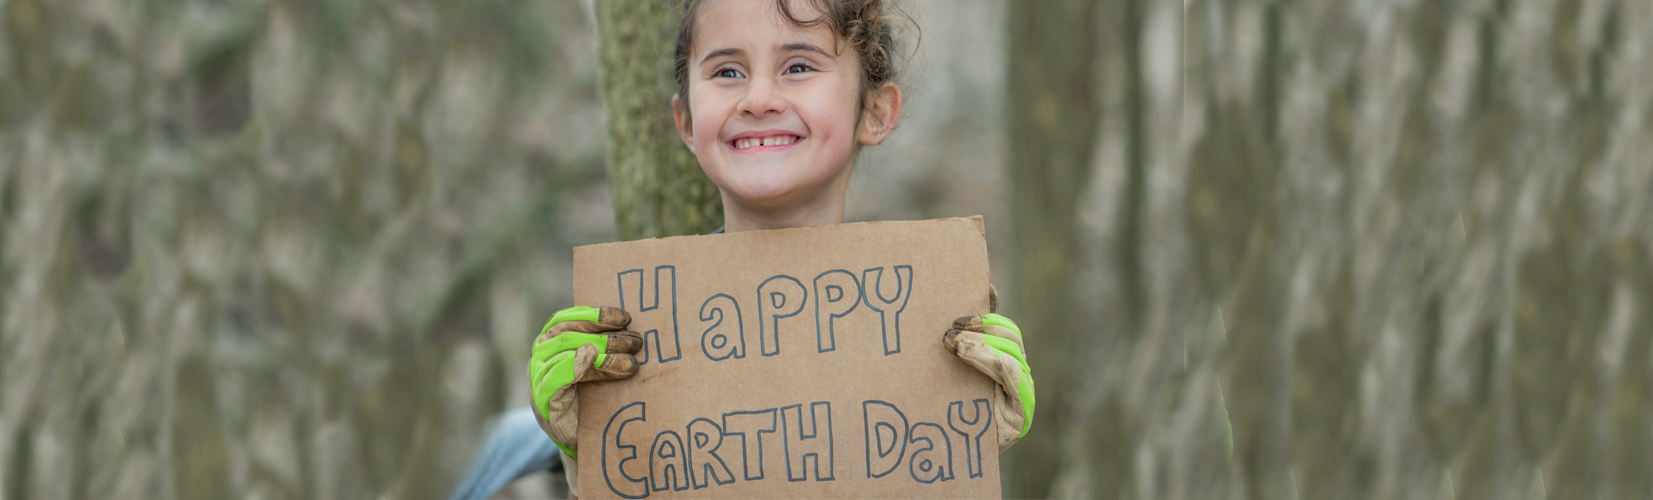 Young girl holding cardboard with Happy Earth Day text